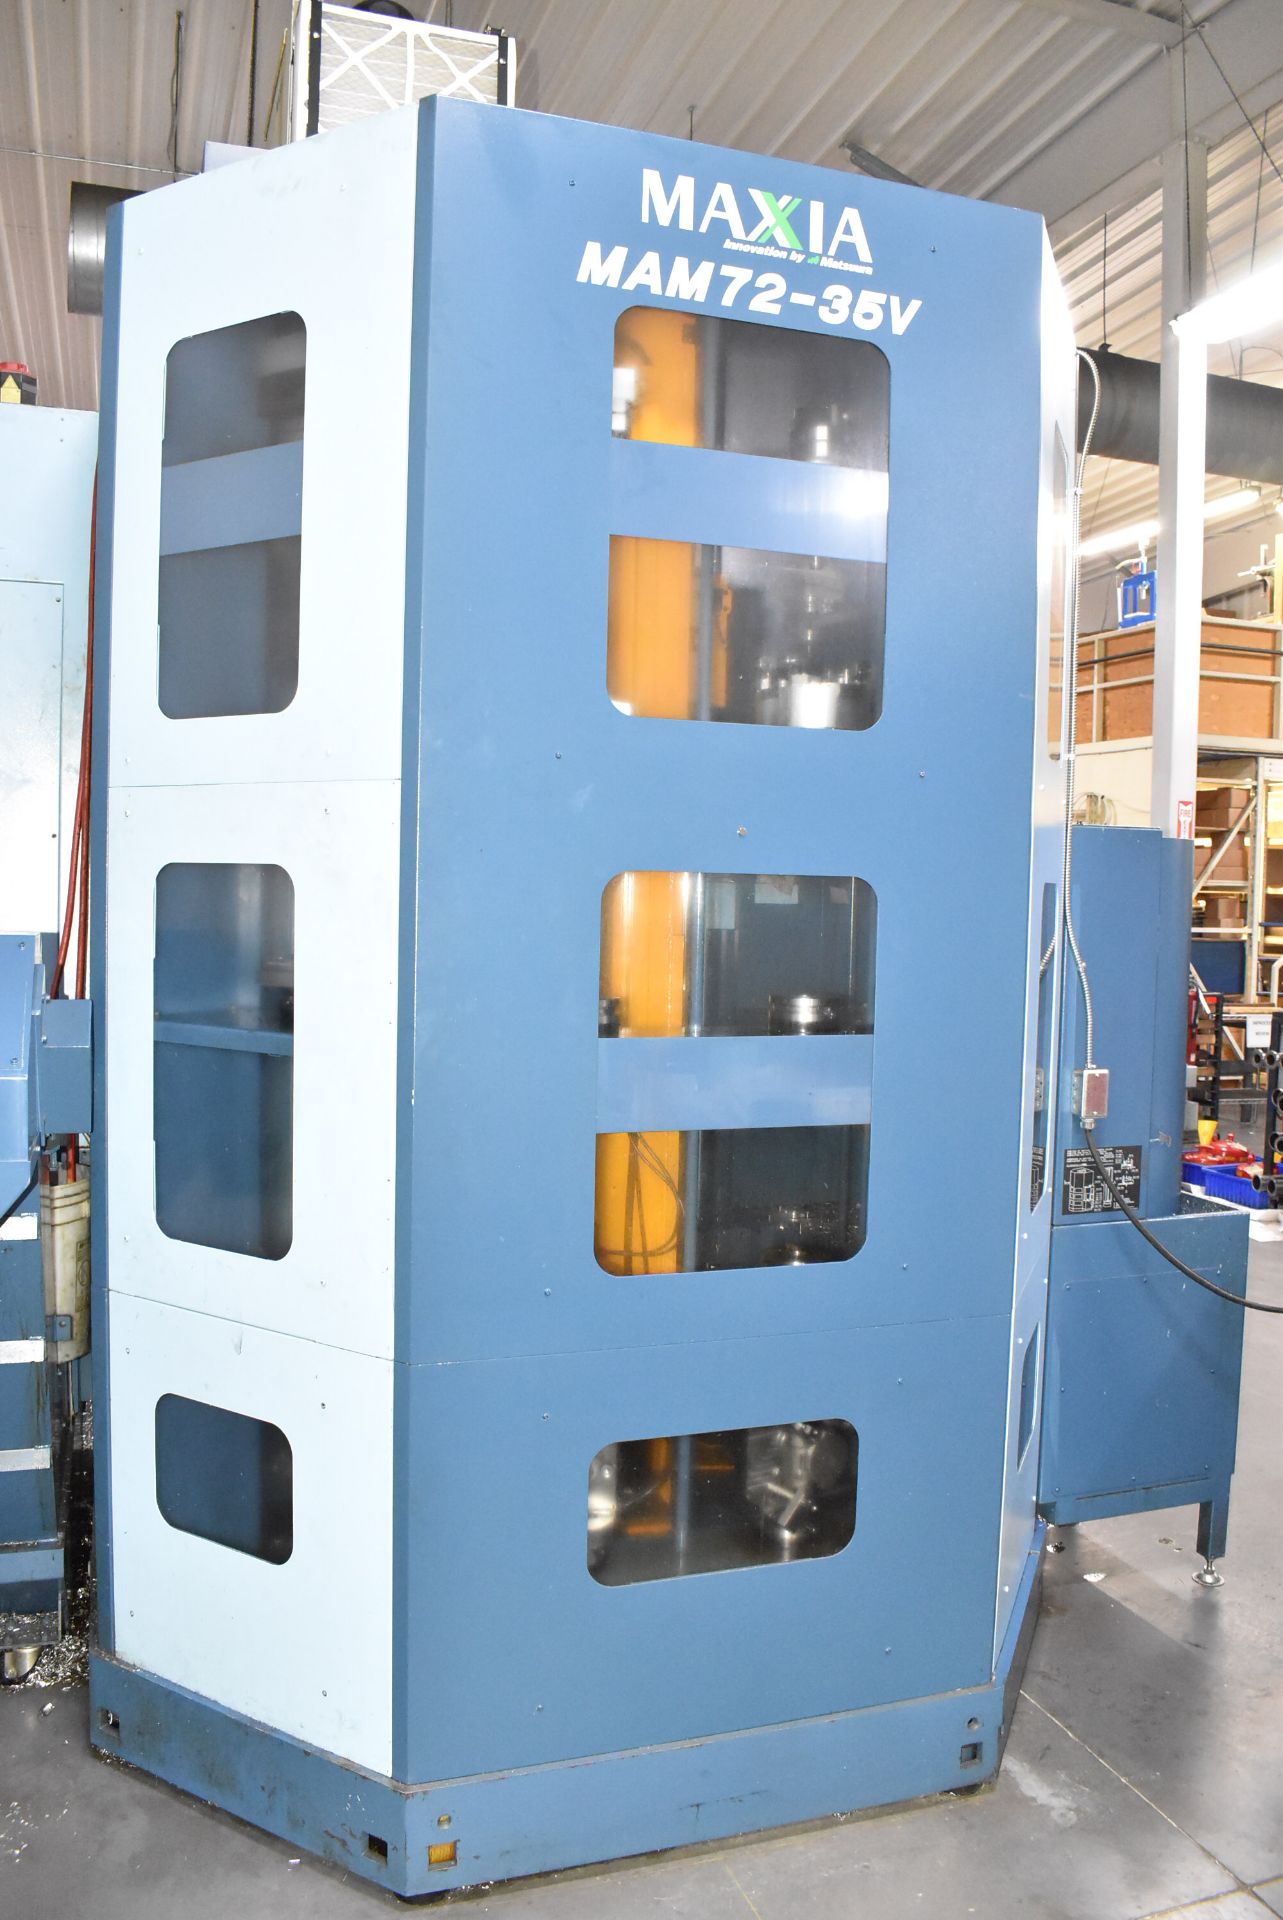 MATSUURA (2010) MAM72-35V MAXIA MULTI-PALLET FULL 5-AXIS HIGH-SPEED CNC VERTICAL MACHINING CELL WITH - Image 8 of 18